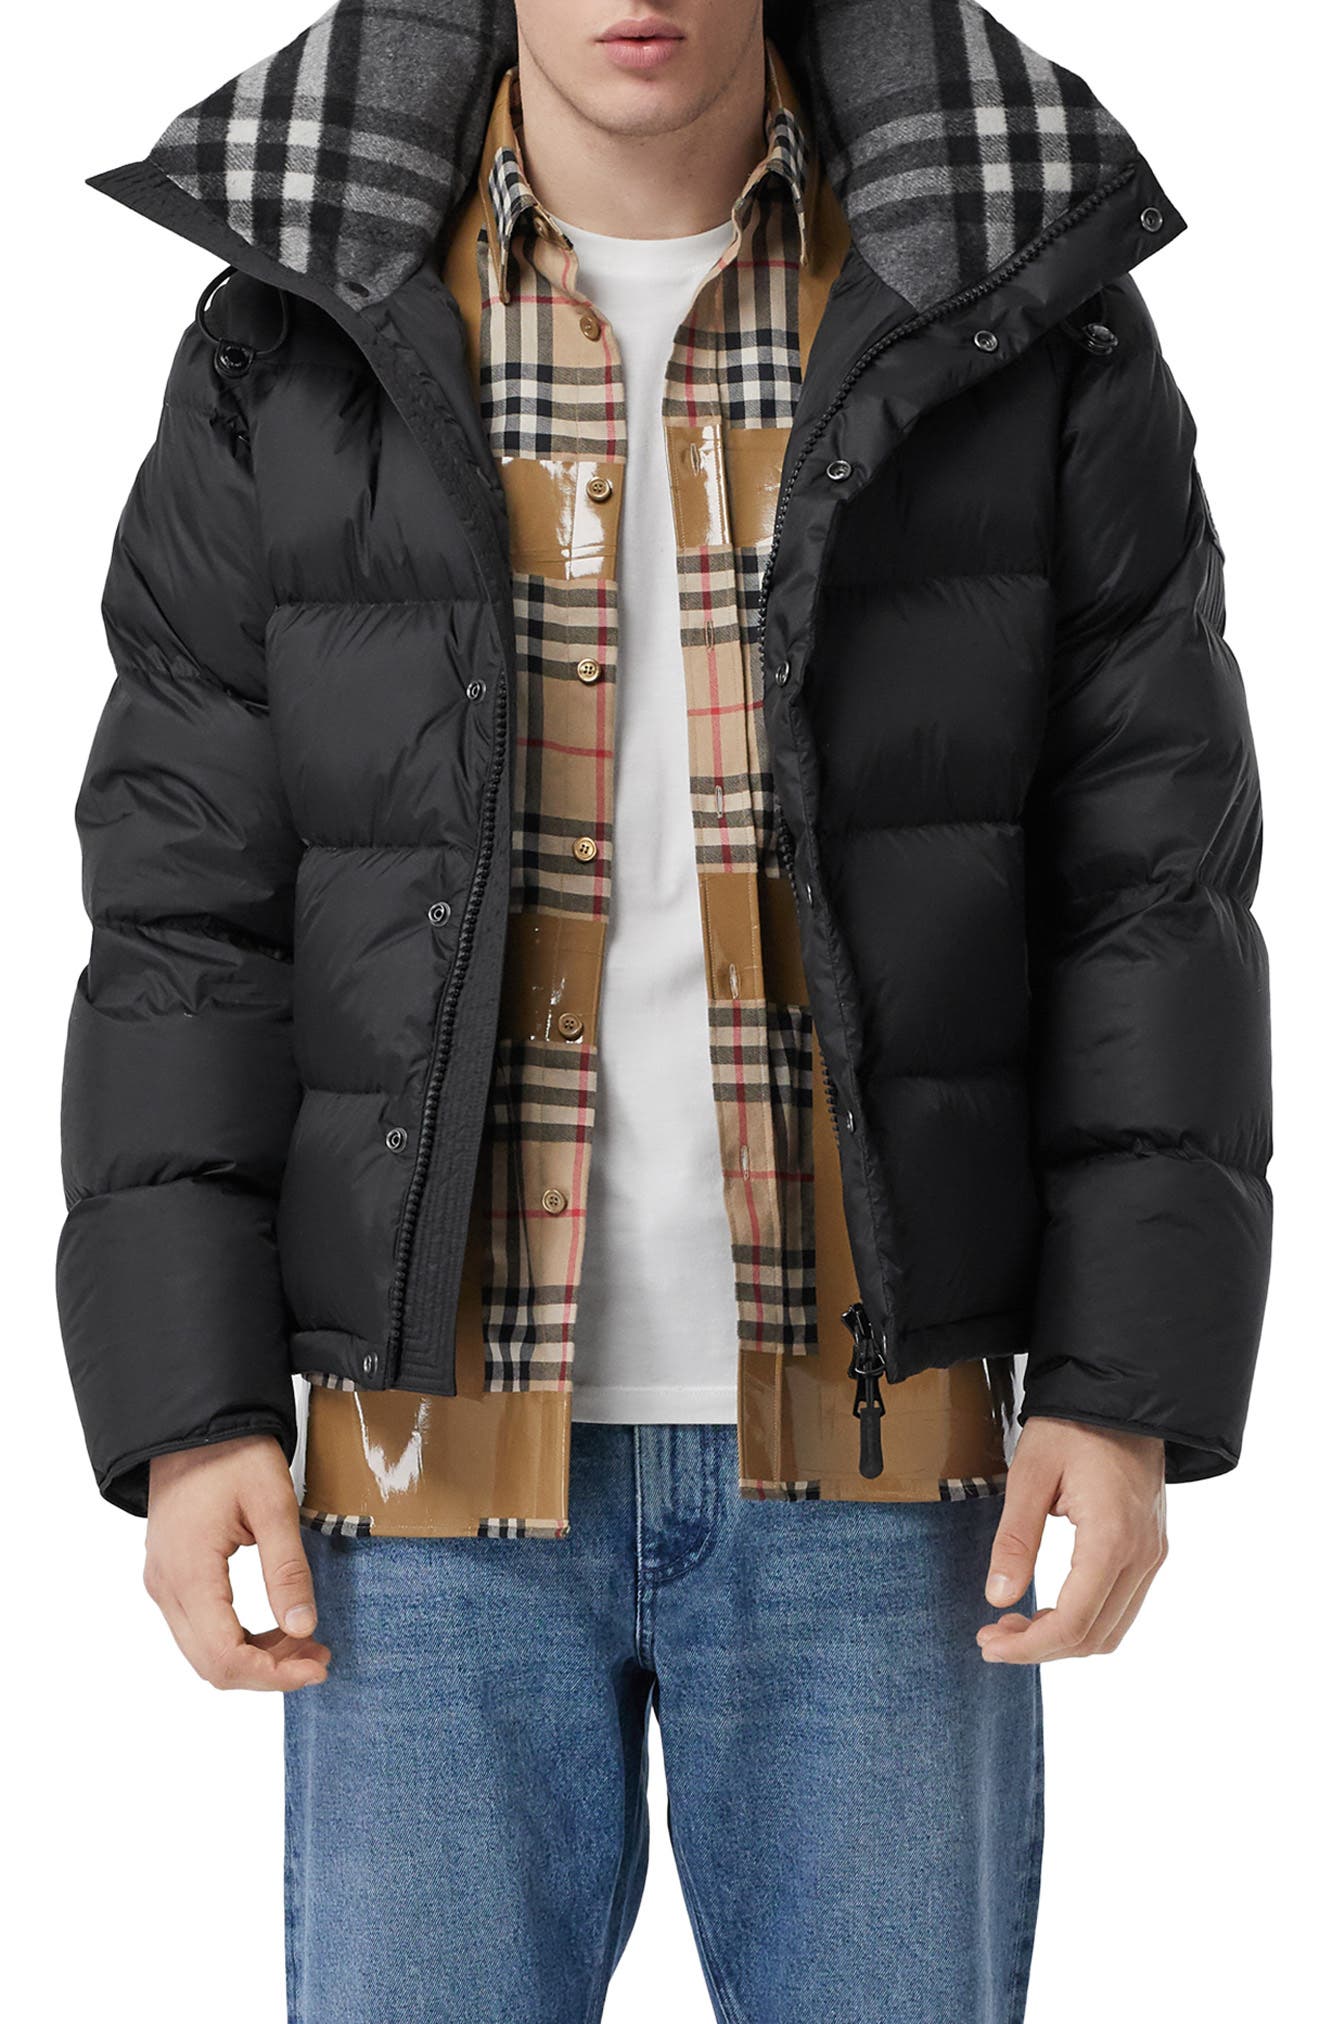 burberry down coat mens, Special Offers - Up To 65% Off |  